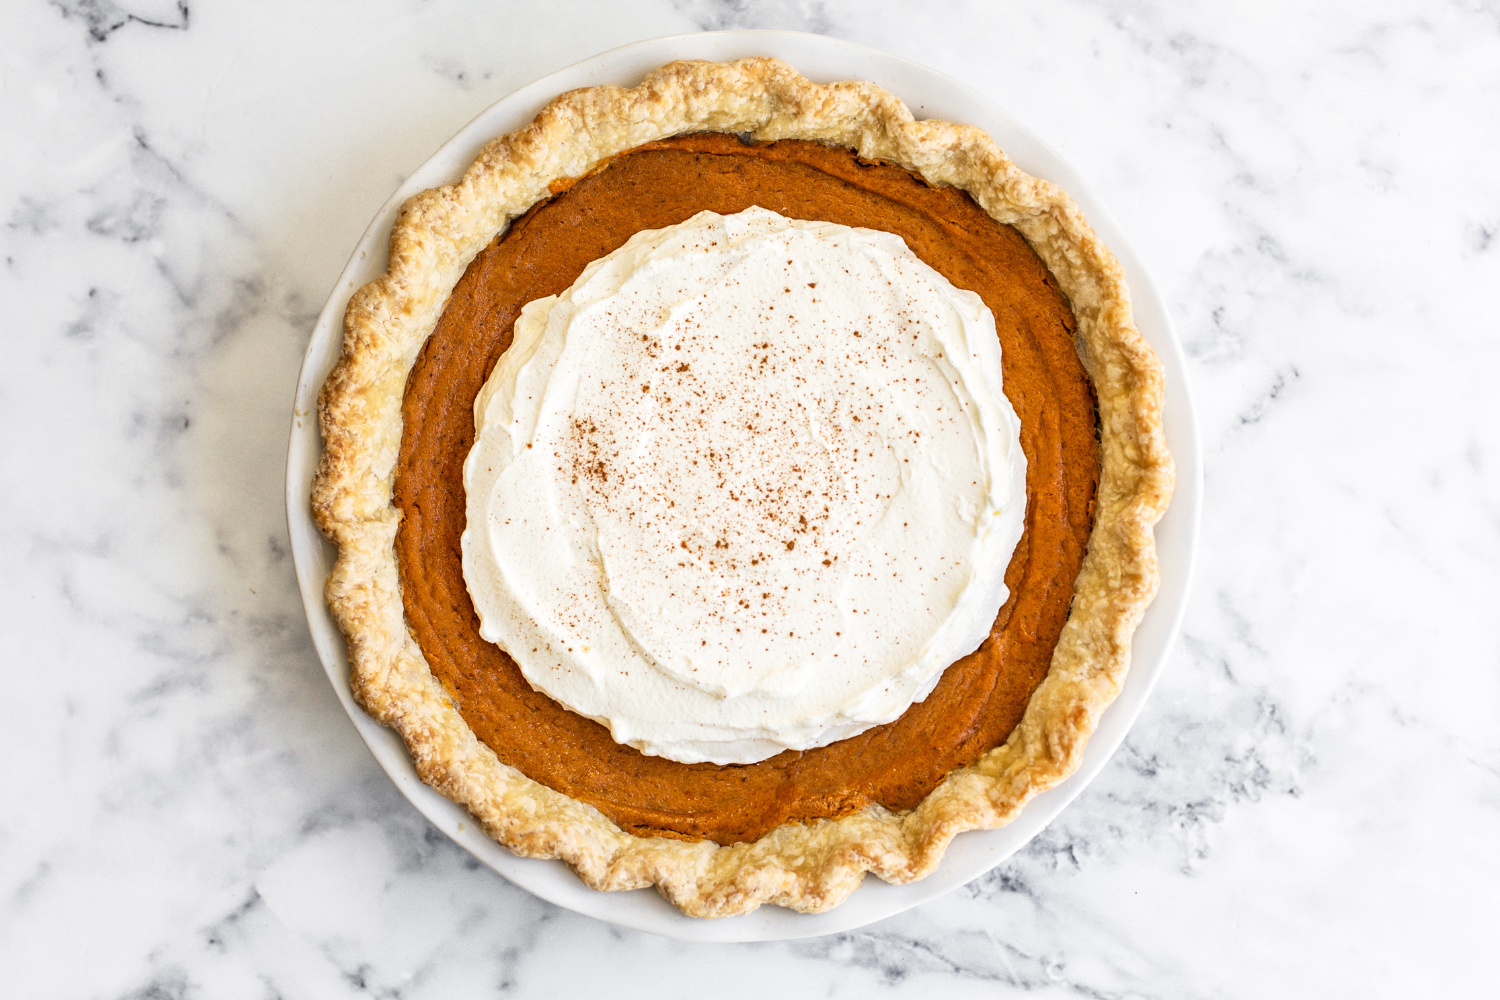 whole, unsliced Brown Butter Sweet Potato Pie in a white ceramic pie dish, with whipped cream and a hint of cinnamon sprinkled on top.